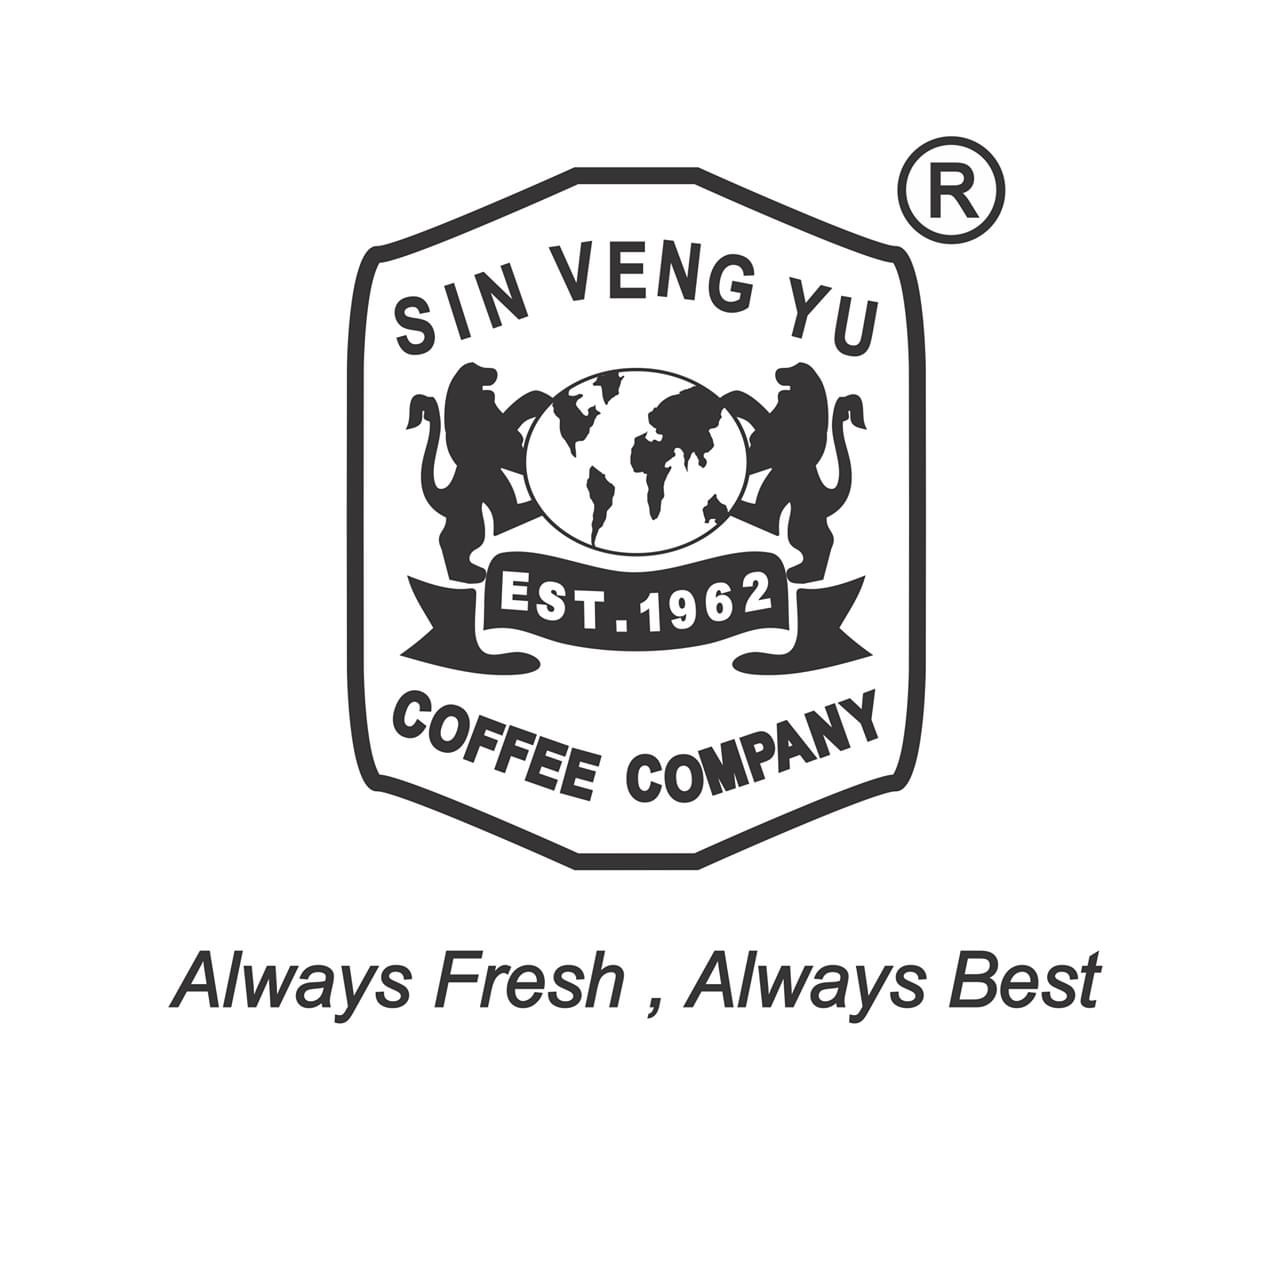 Sin Veng Yu Coffee Company: A Cambodian Coffee Venture, 59 Years Old and Still Counting